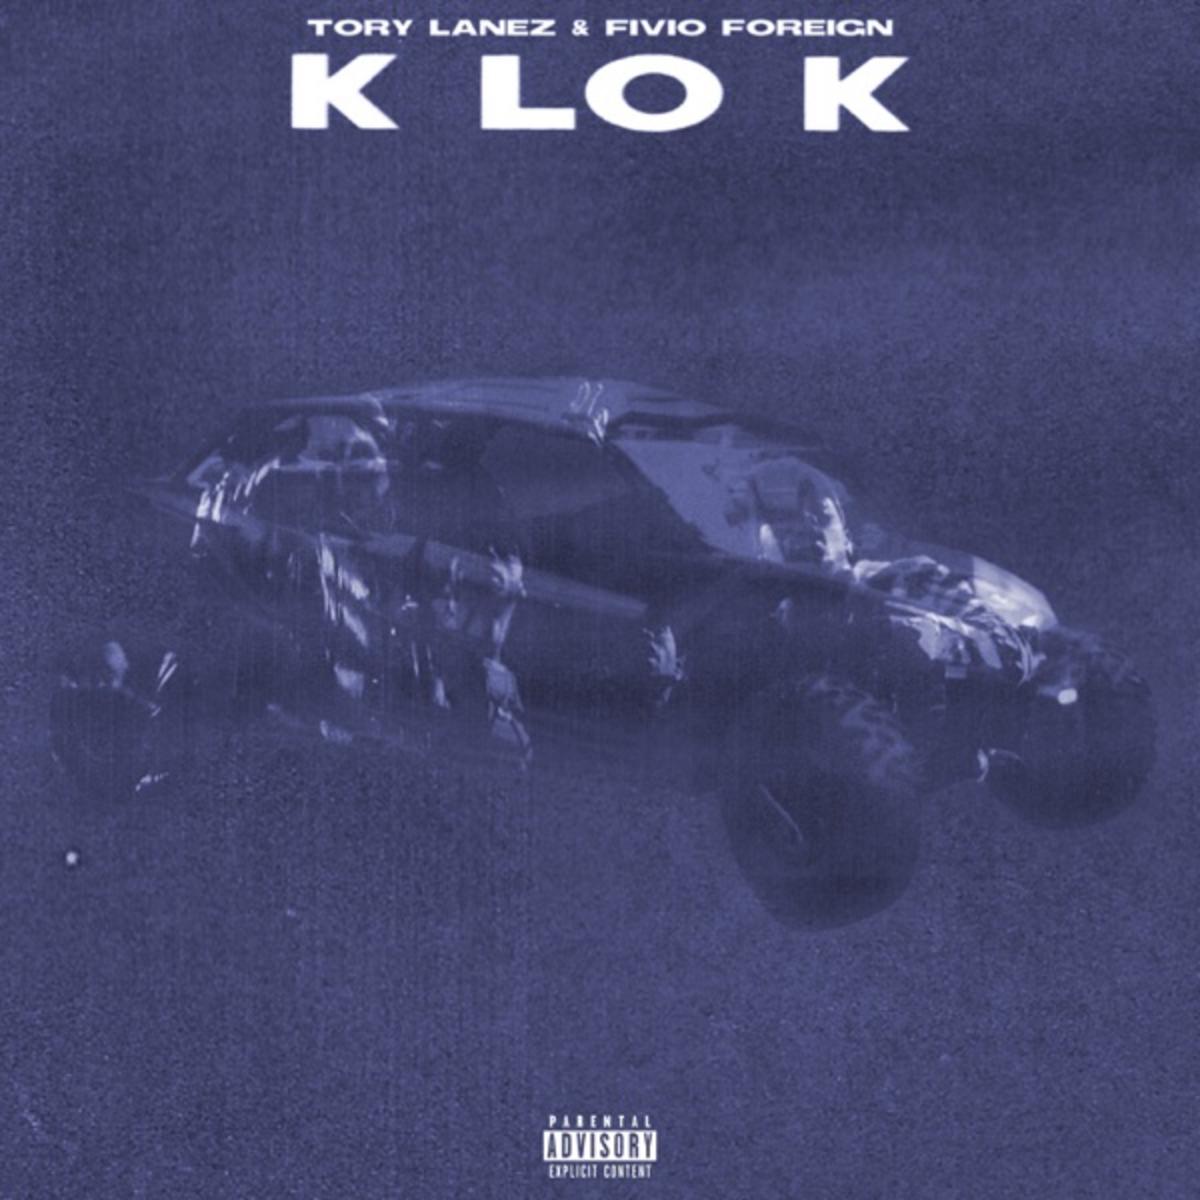 DOWNLOAD MP3 Tory Lanez - K Lo K Ft Fivio Foreign